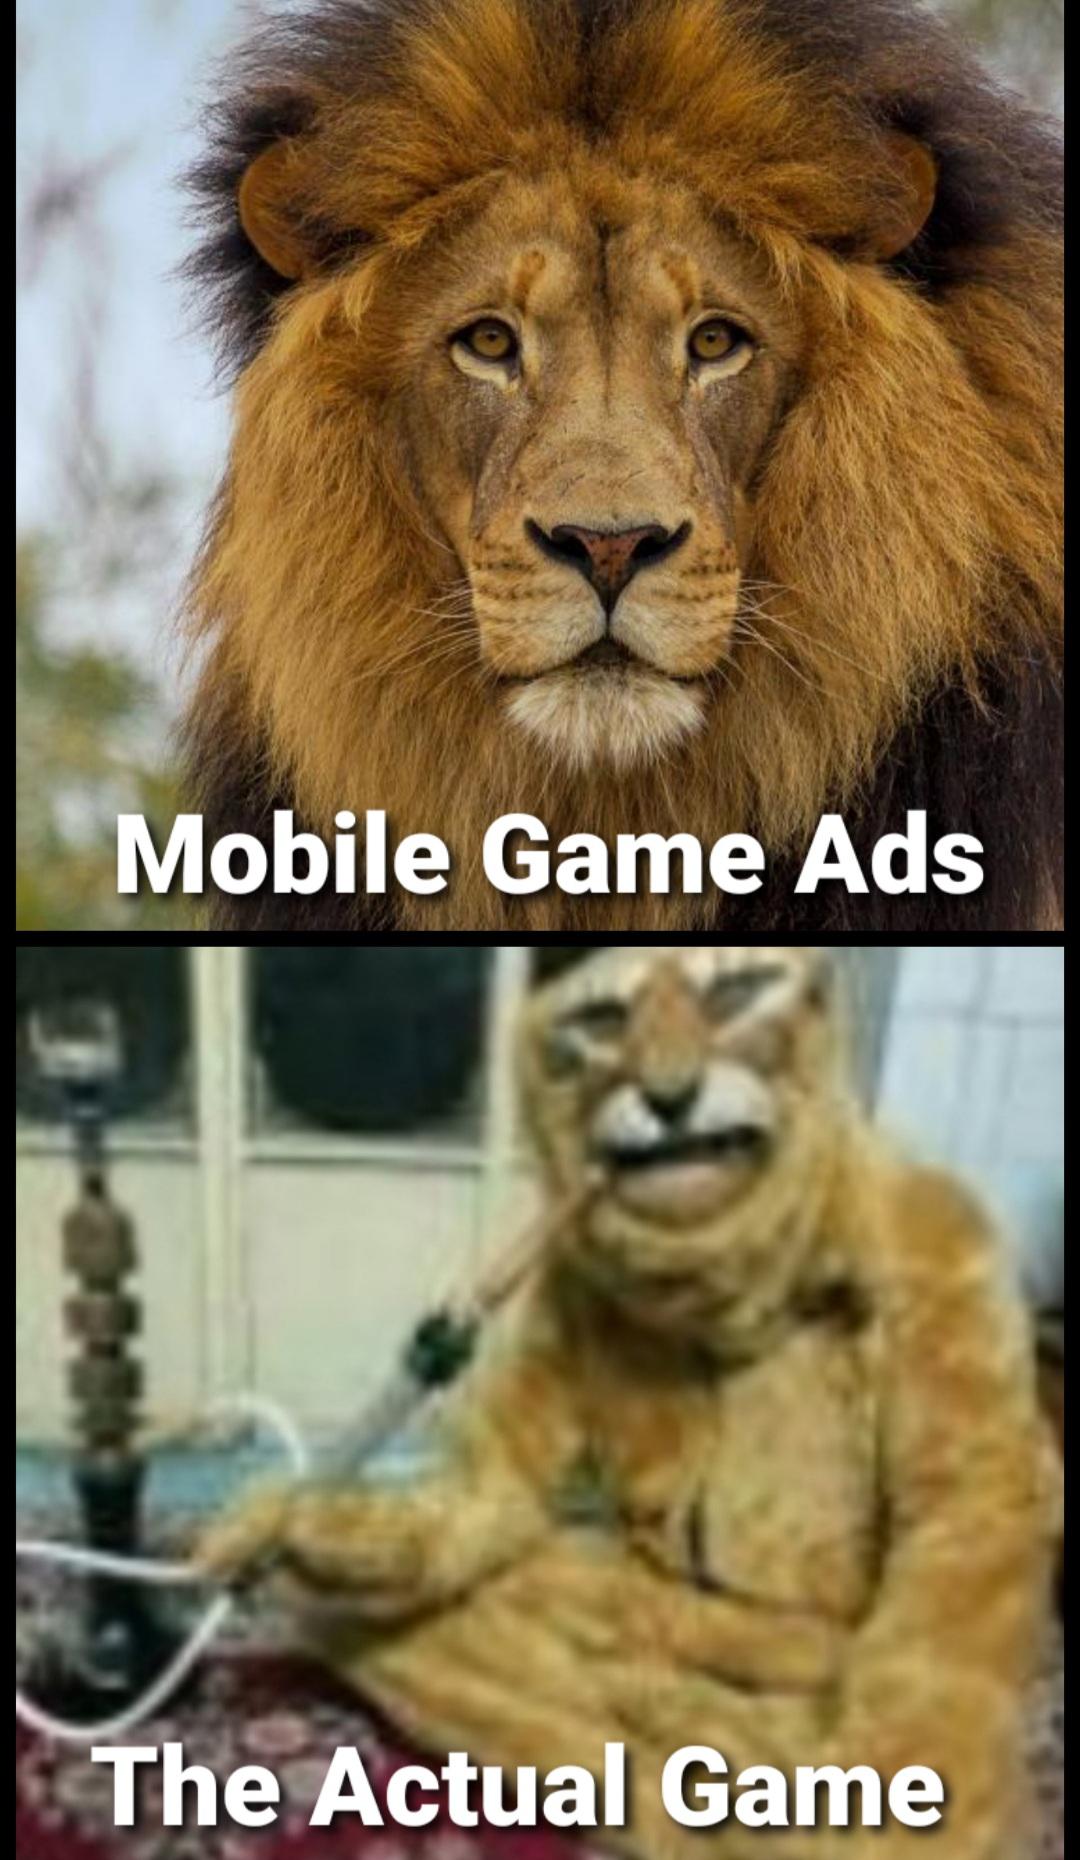 one piece 1028 meme - Mobile Game Ads The Actual Game